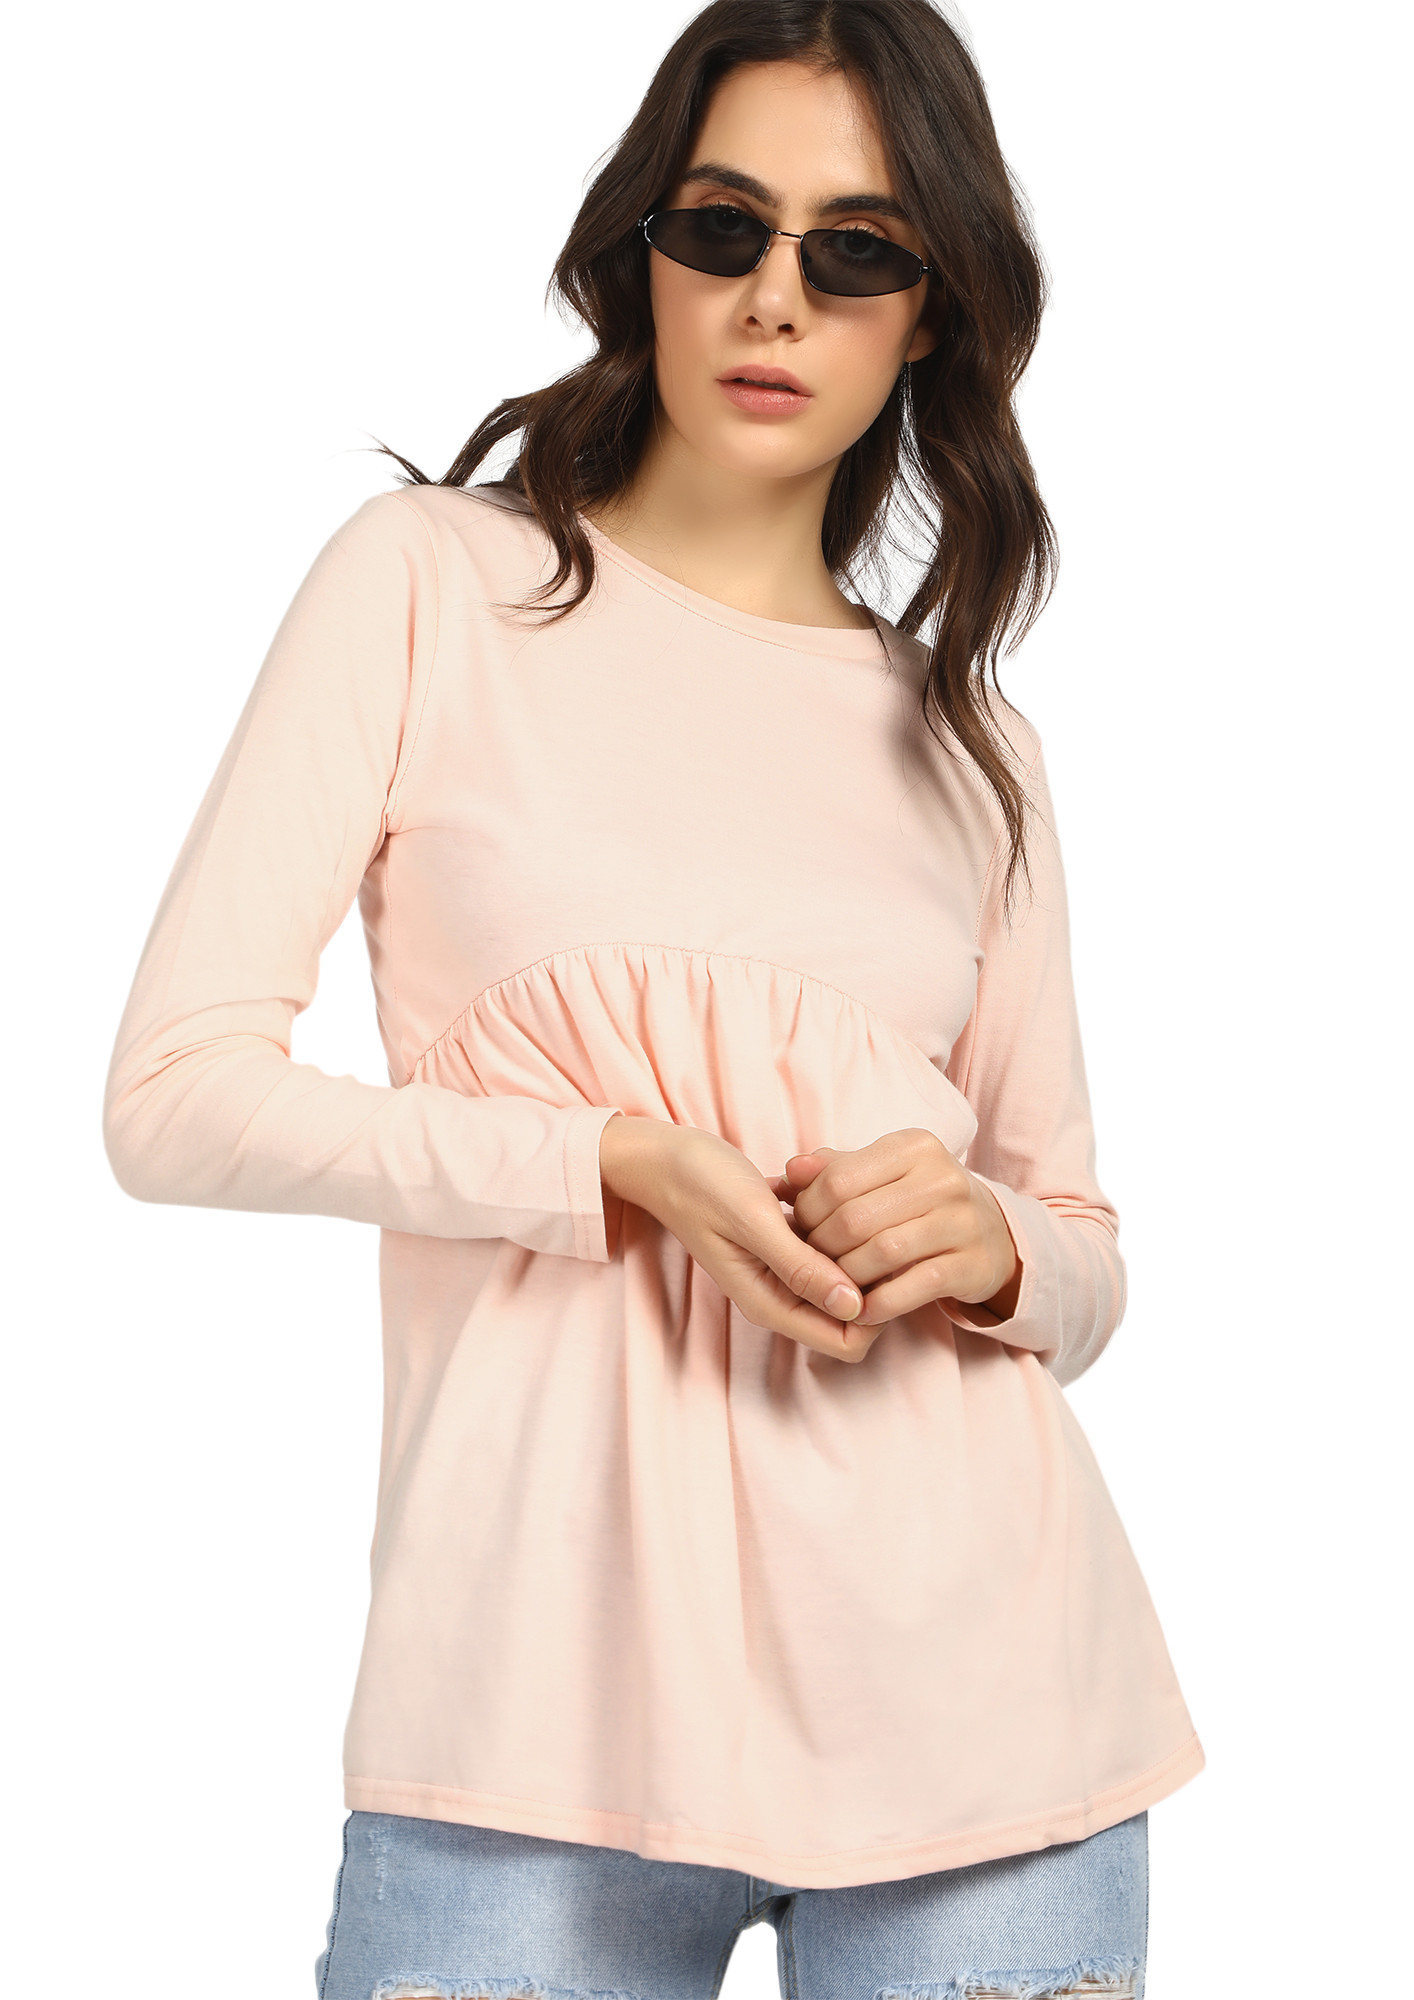 PRETTY IN BASIC BABY PINK TOP